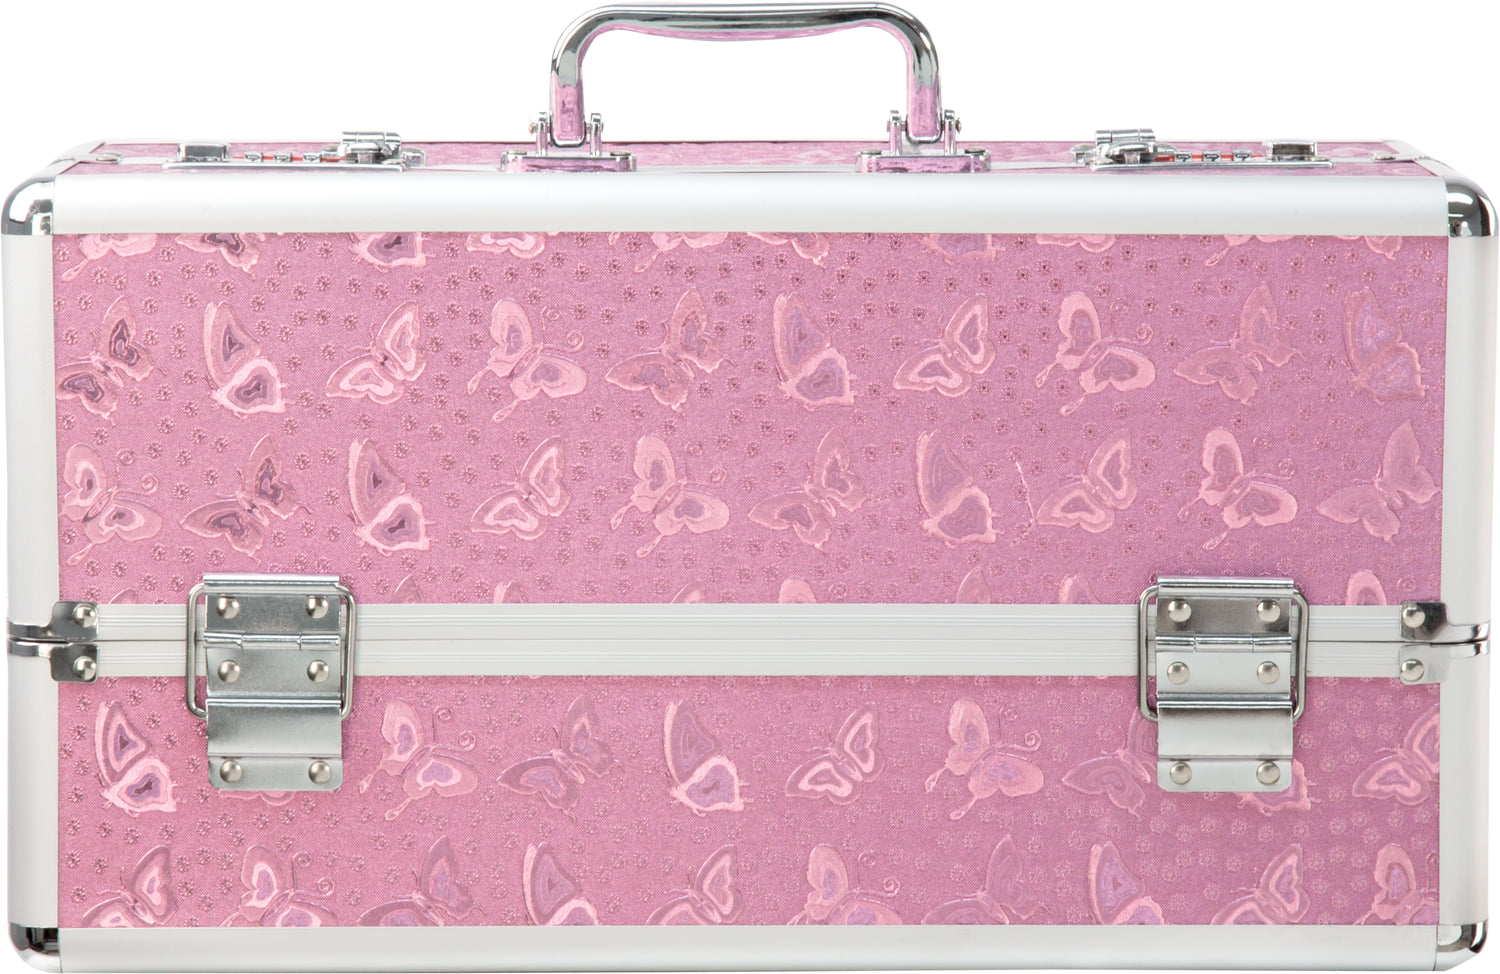 Lockable Large Vibrator Case Pink - Just for you desires